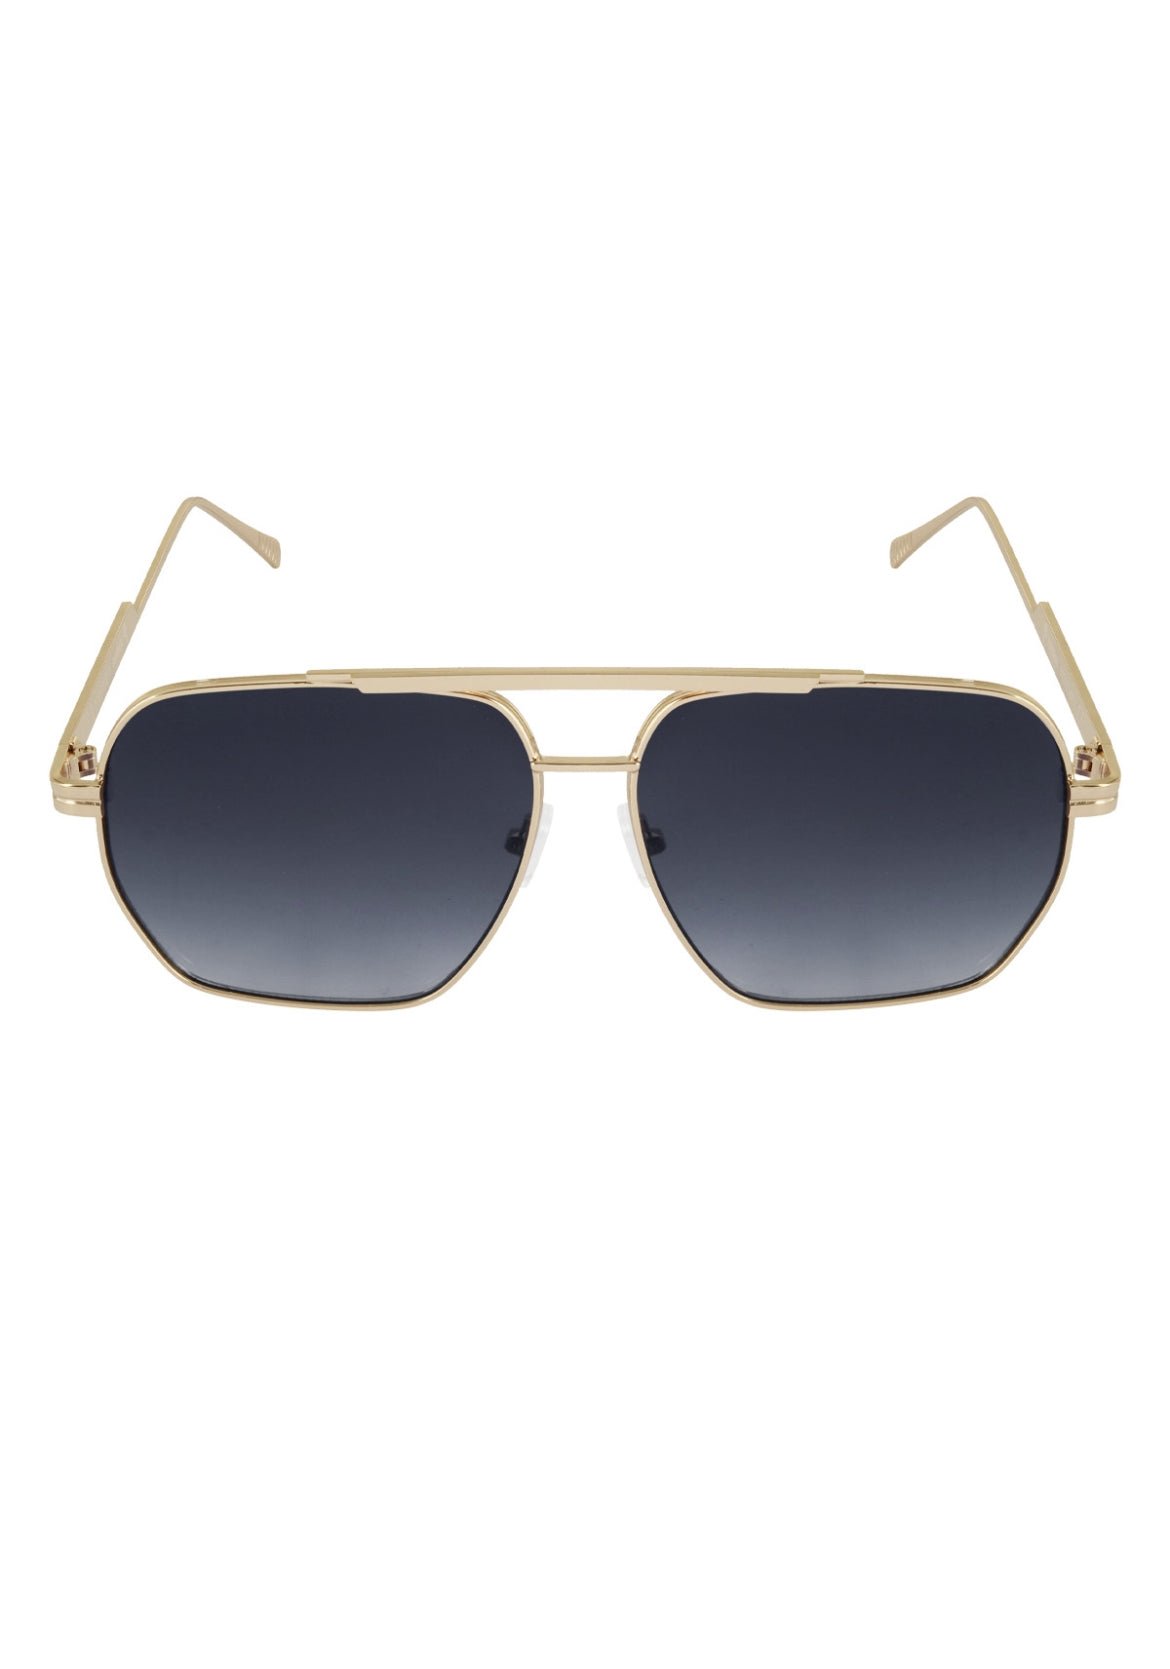 ♥︎METAL SUMMER SUNGLASSES - BLACK AND GOLD - My Favourites